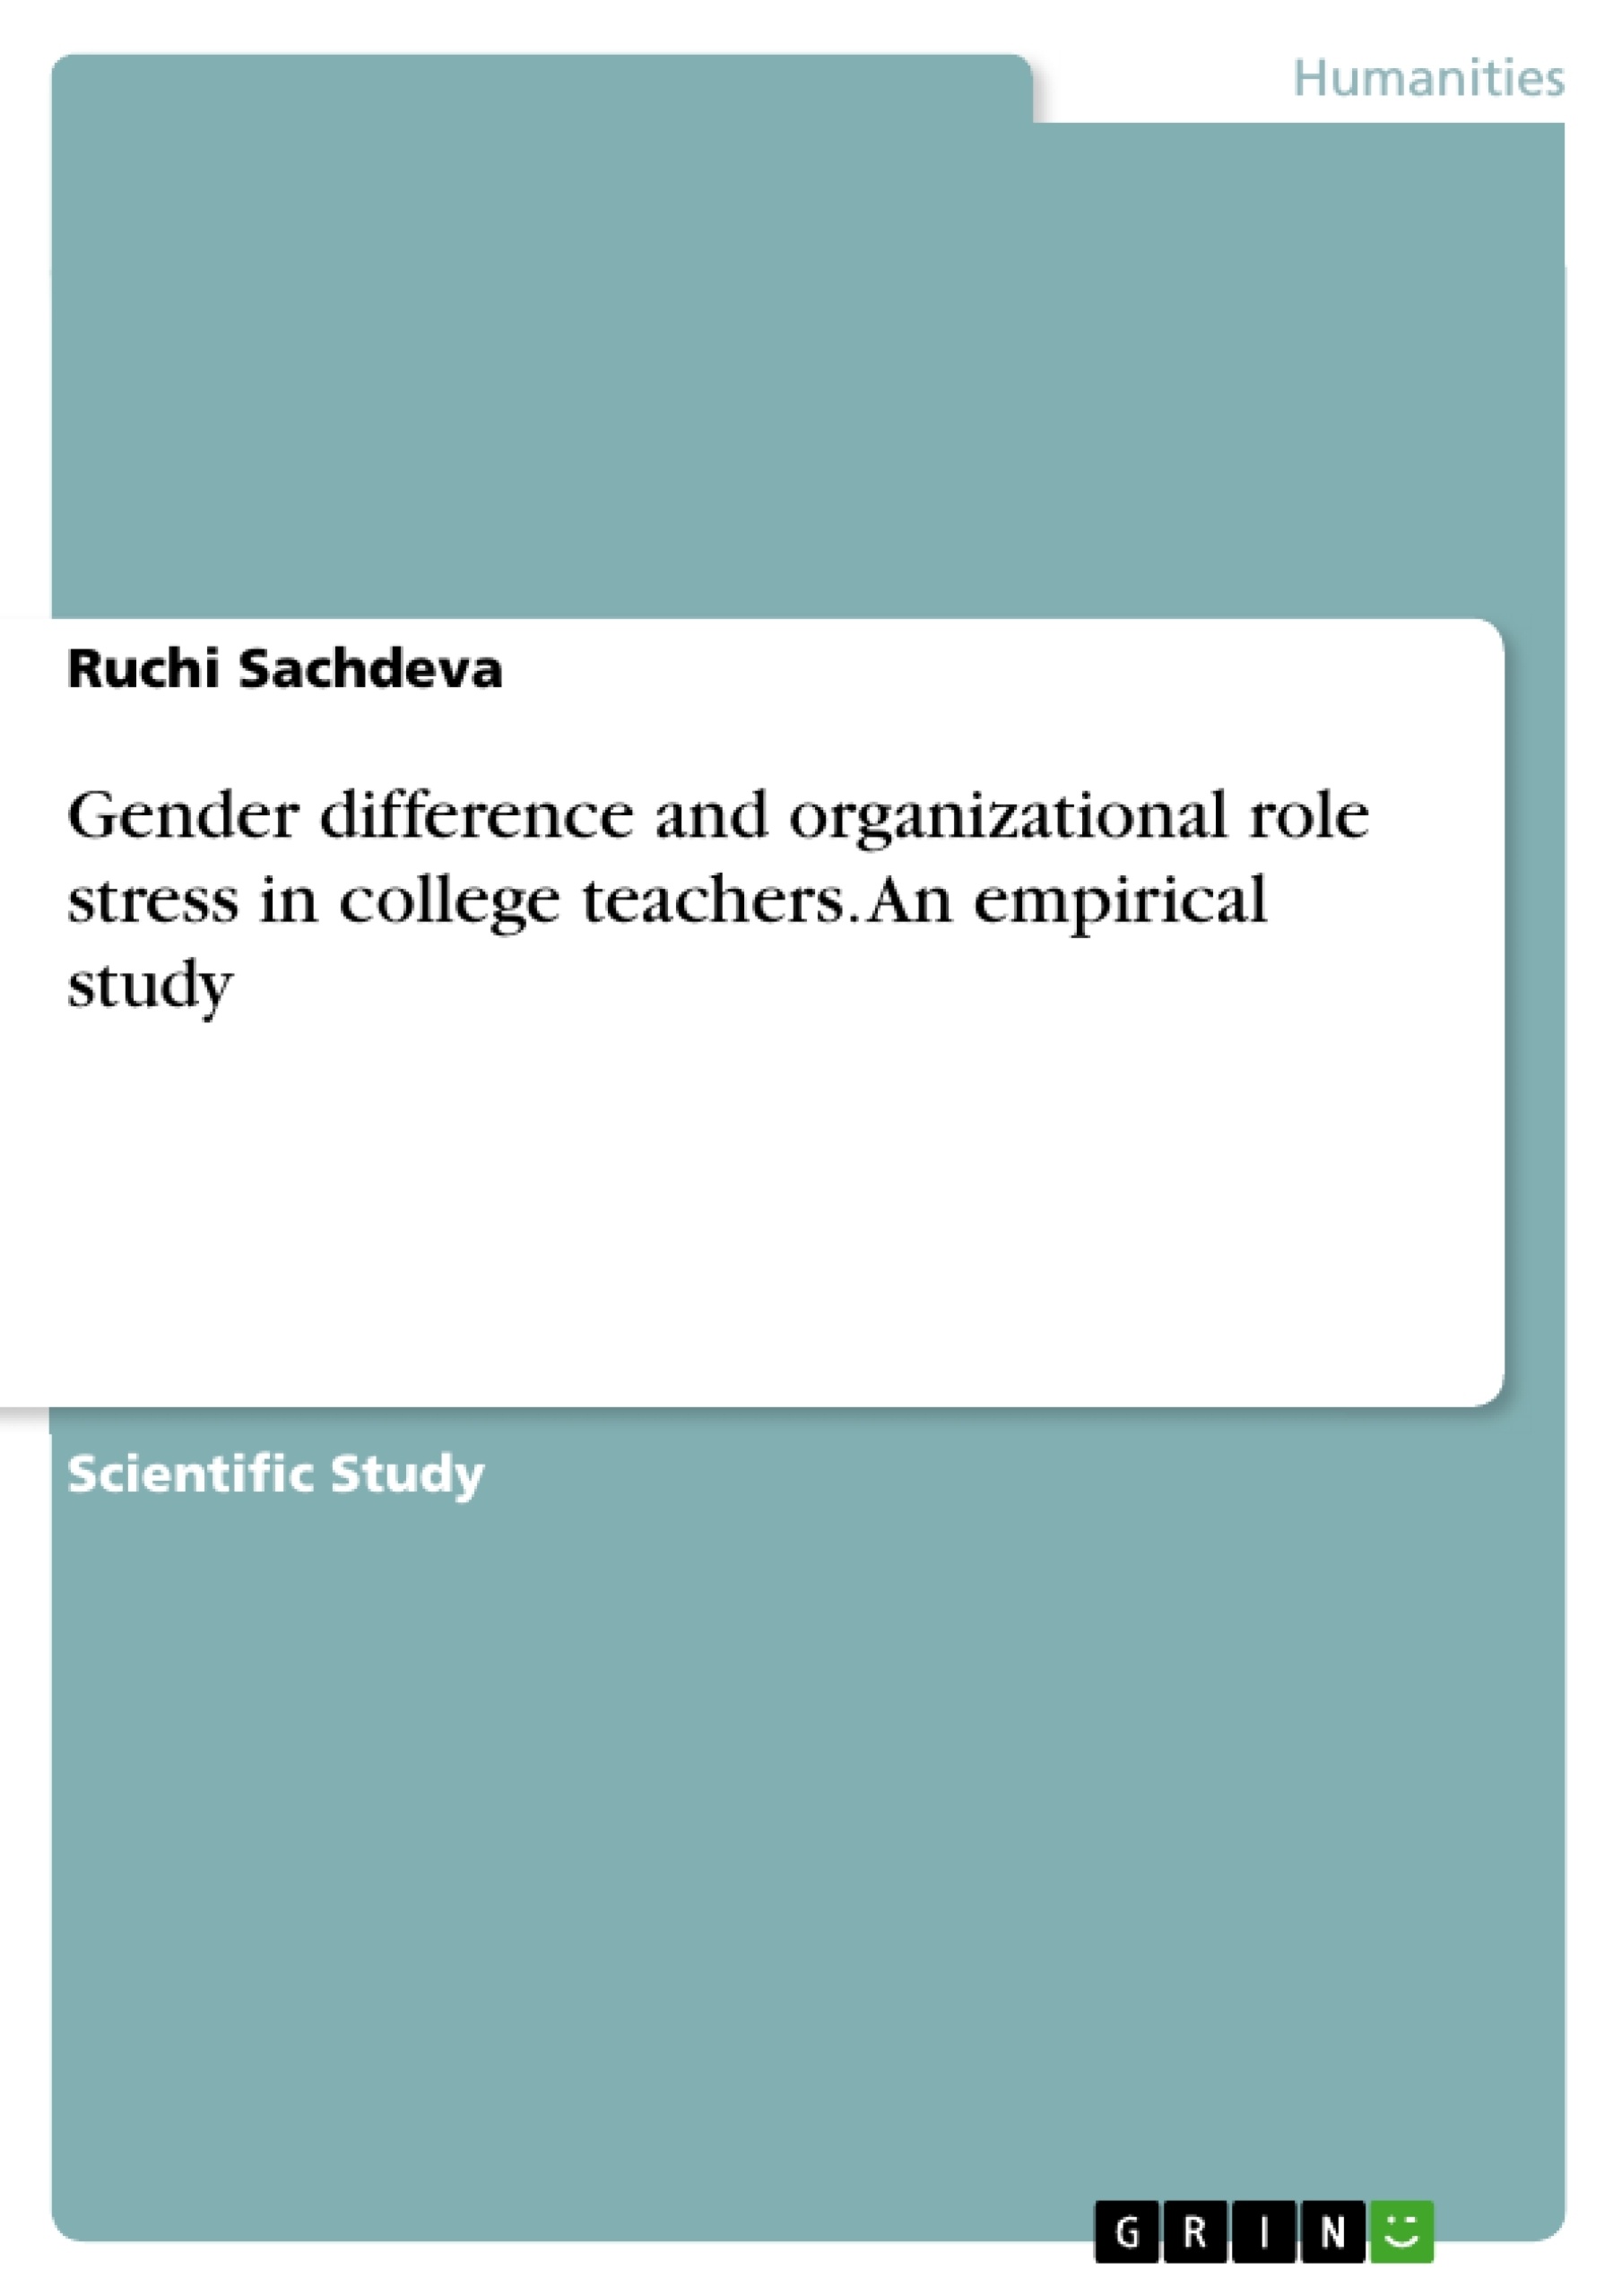 Titre: Gender difference and organizational role stress in college teachers. An empirical study